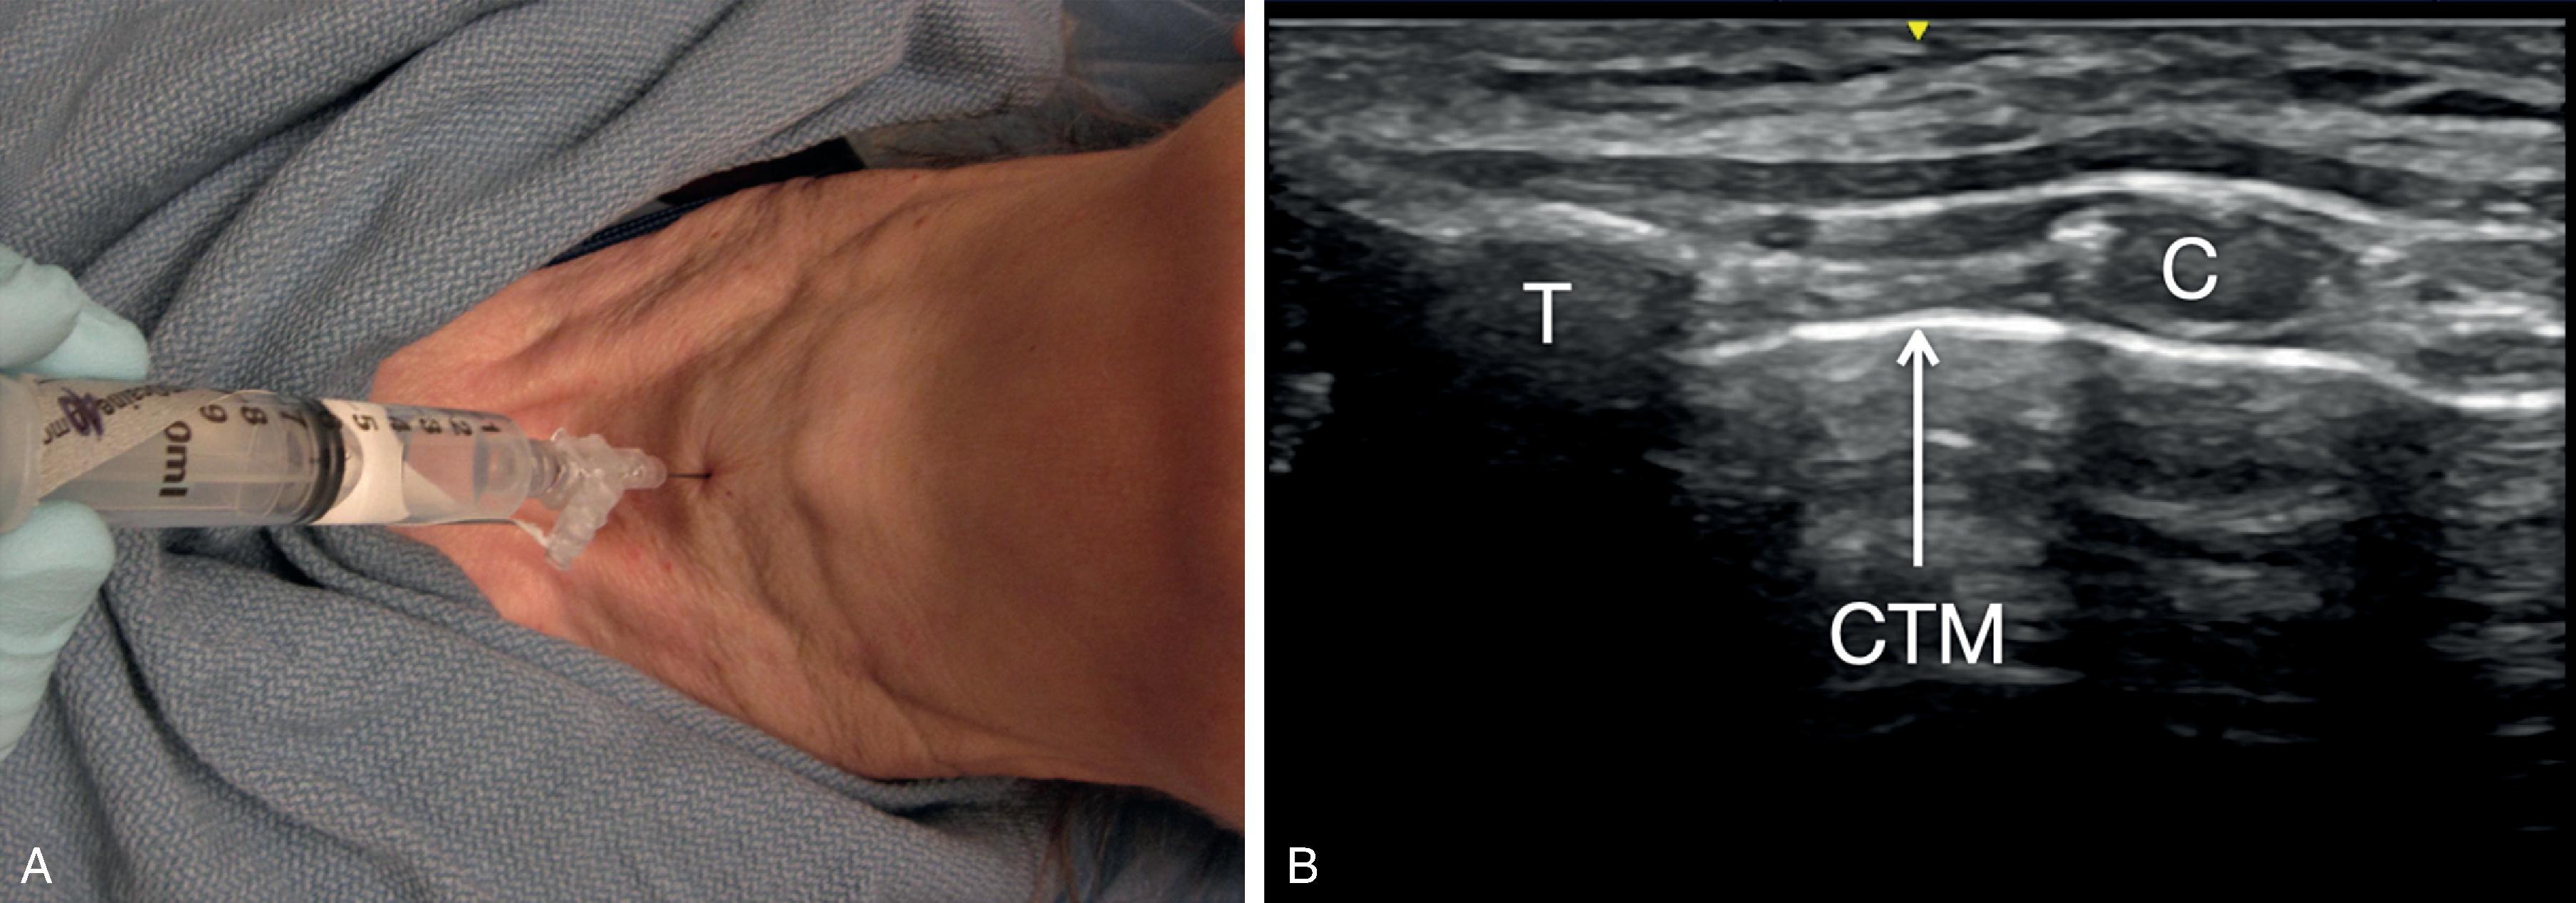 Fig. 24.21, (A) Transtracheal block. The operator braces his or her hand on the patient’s chest while aspirating for air through the cricothyroid membrane. (B) Sagittal plane ultrasound image of the cricothyroid membrane, where left is cranial and right is caudal. C, Cricoid cartilage; CTM, cricothyroid membrane; T, thyroid cartilage;.